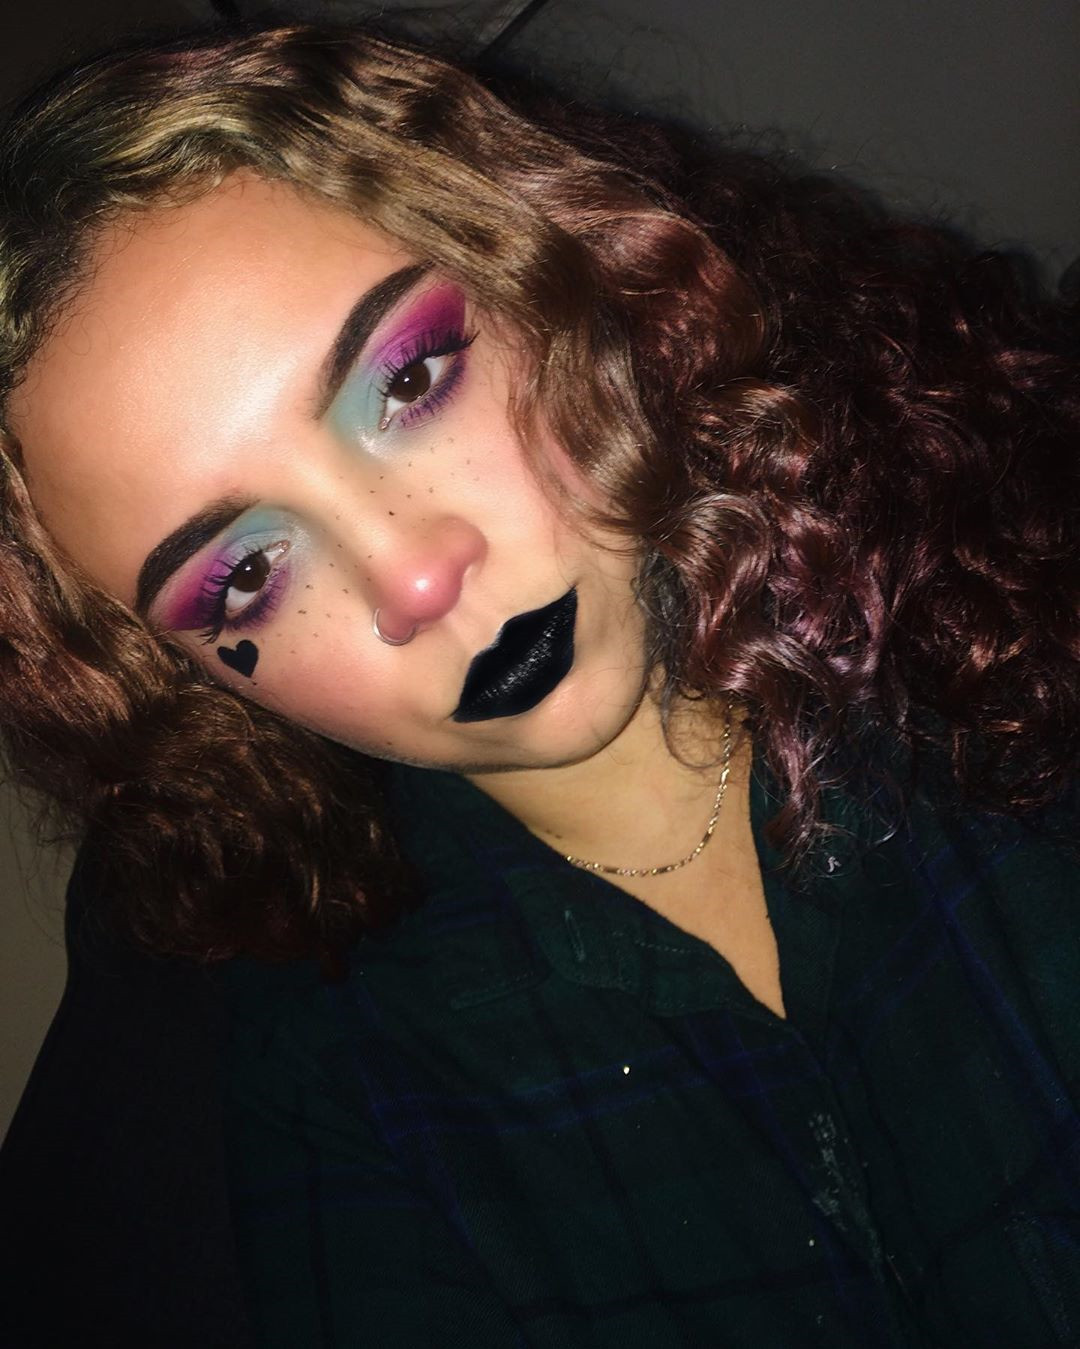 Grunge Makeup Ideas You Want to Display,90s grunge makeup,grunge makeup for dark skin,grunge makeup tutorial easy,80s grunge makeup